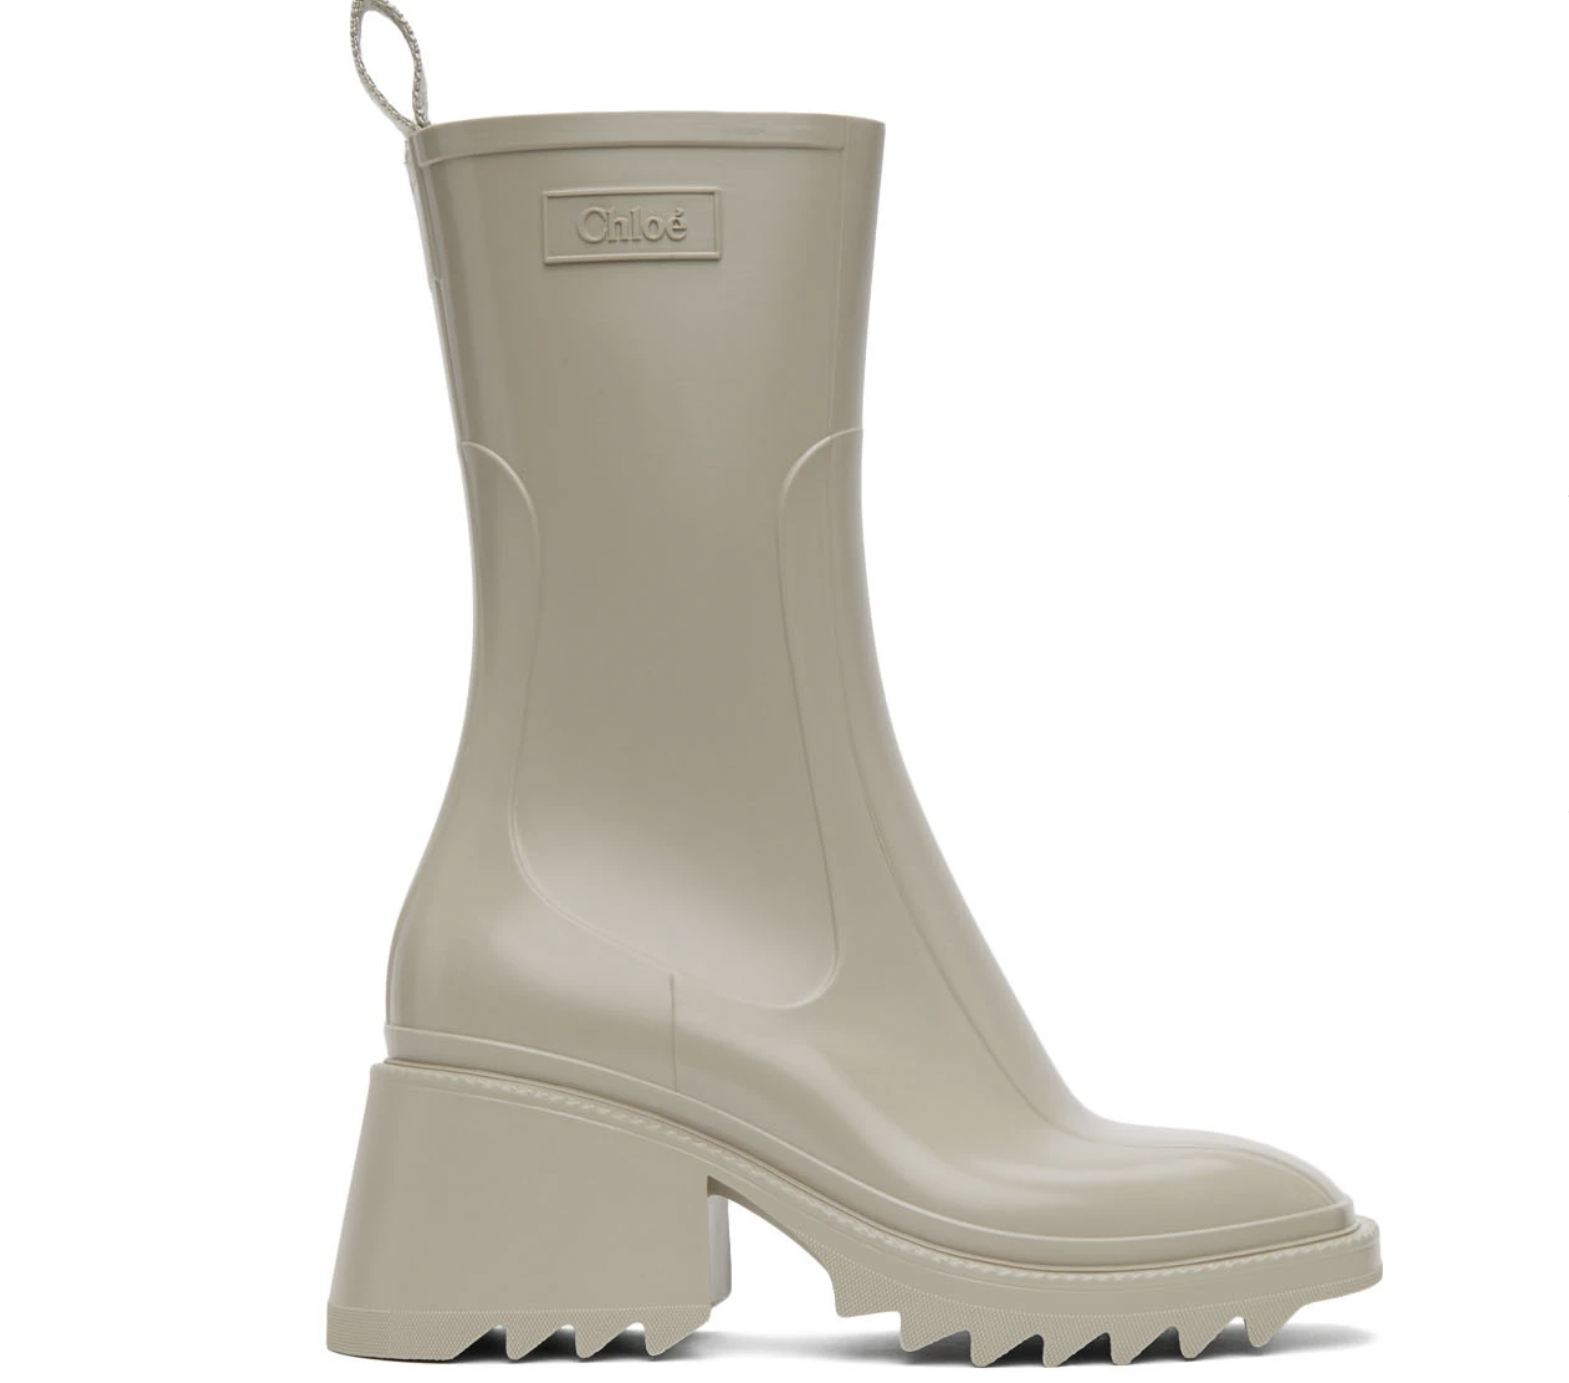 Chloe Rubber Boots